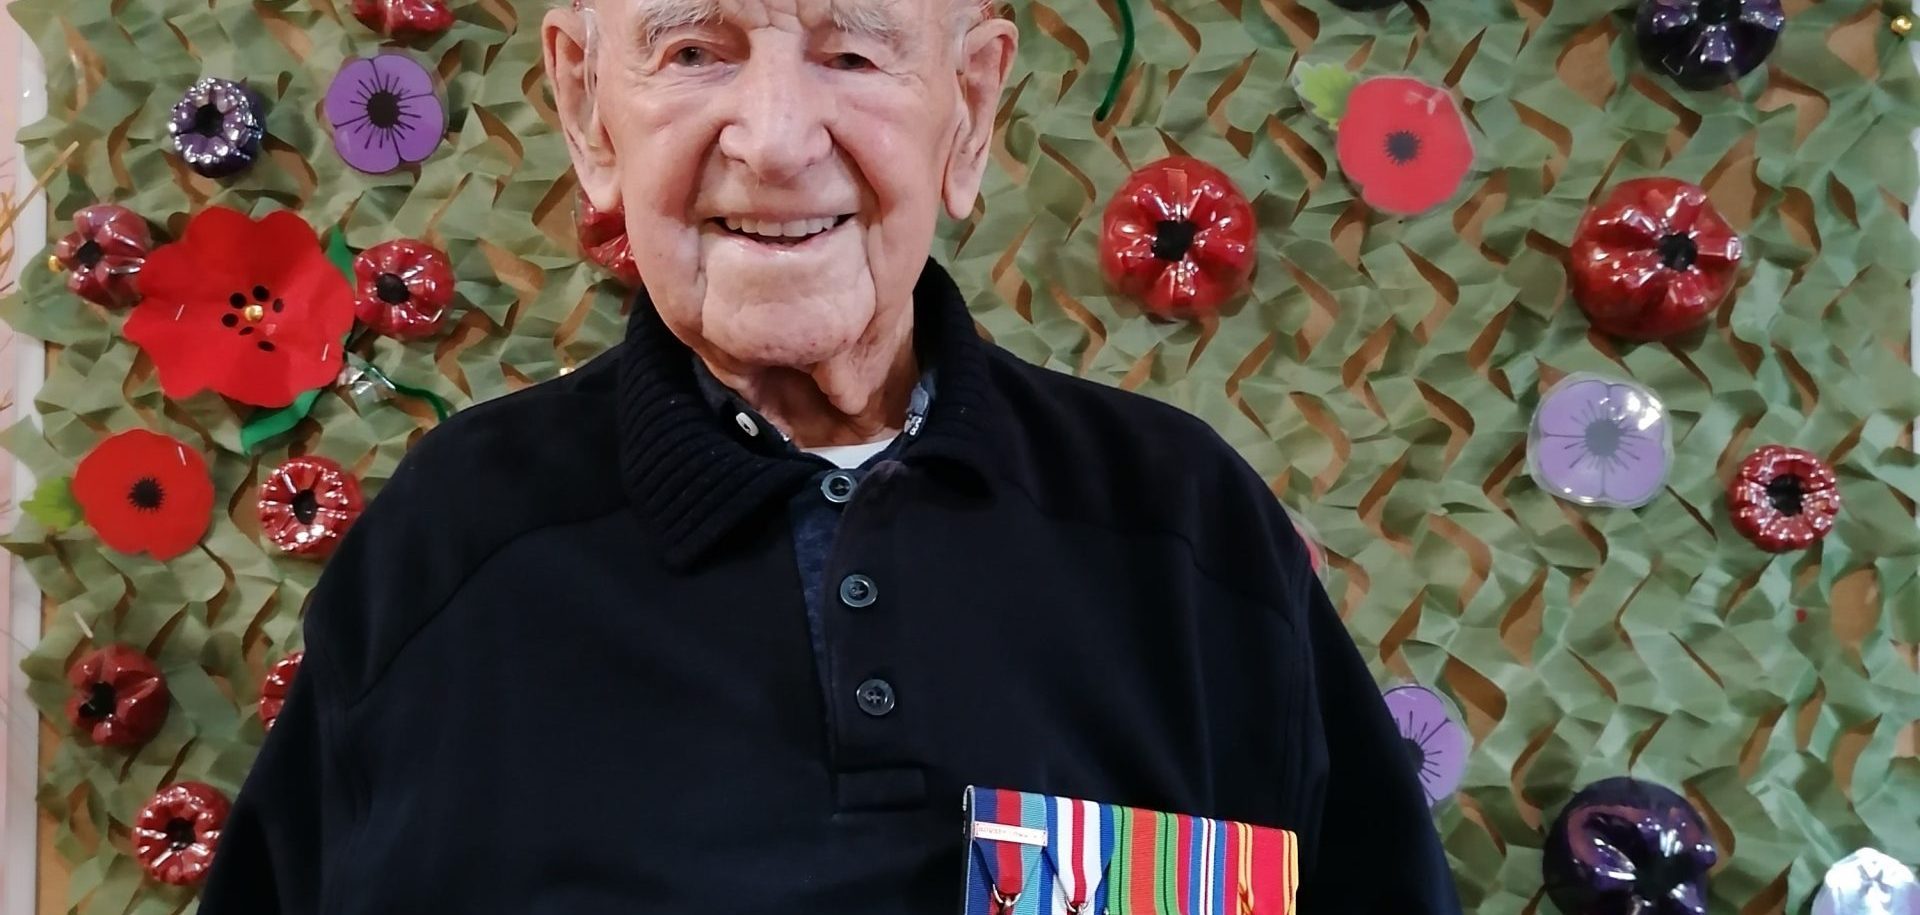 Scarbrough Court resident and WWII veteran Joe Dixon, aged 107, in front of the Home’s Remembrance Day display